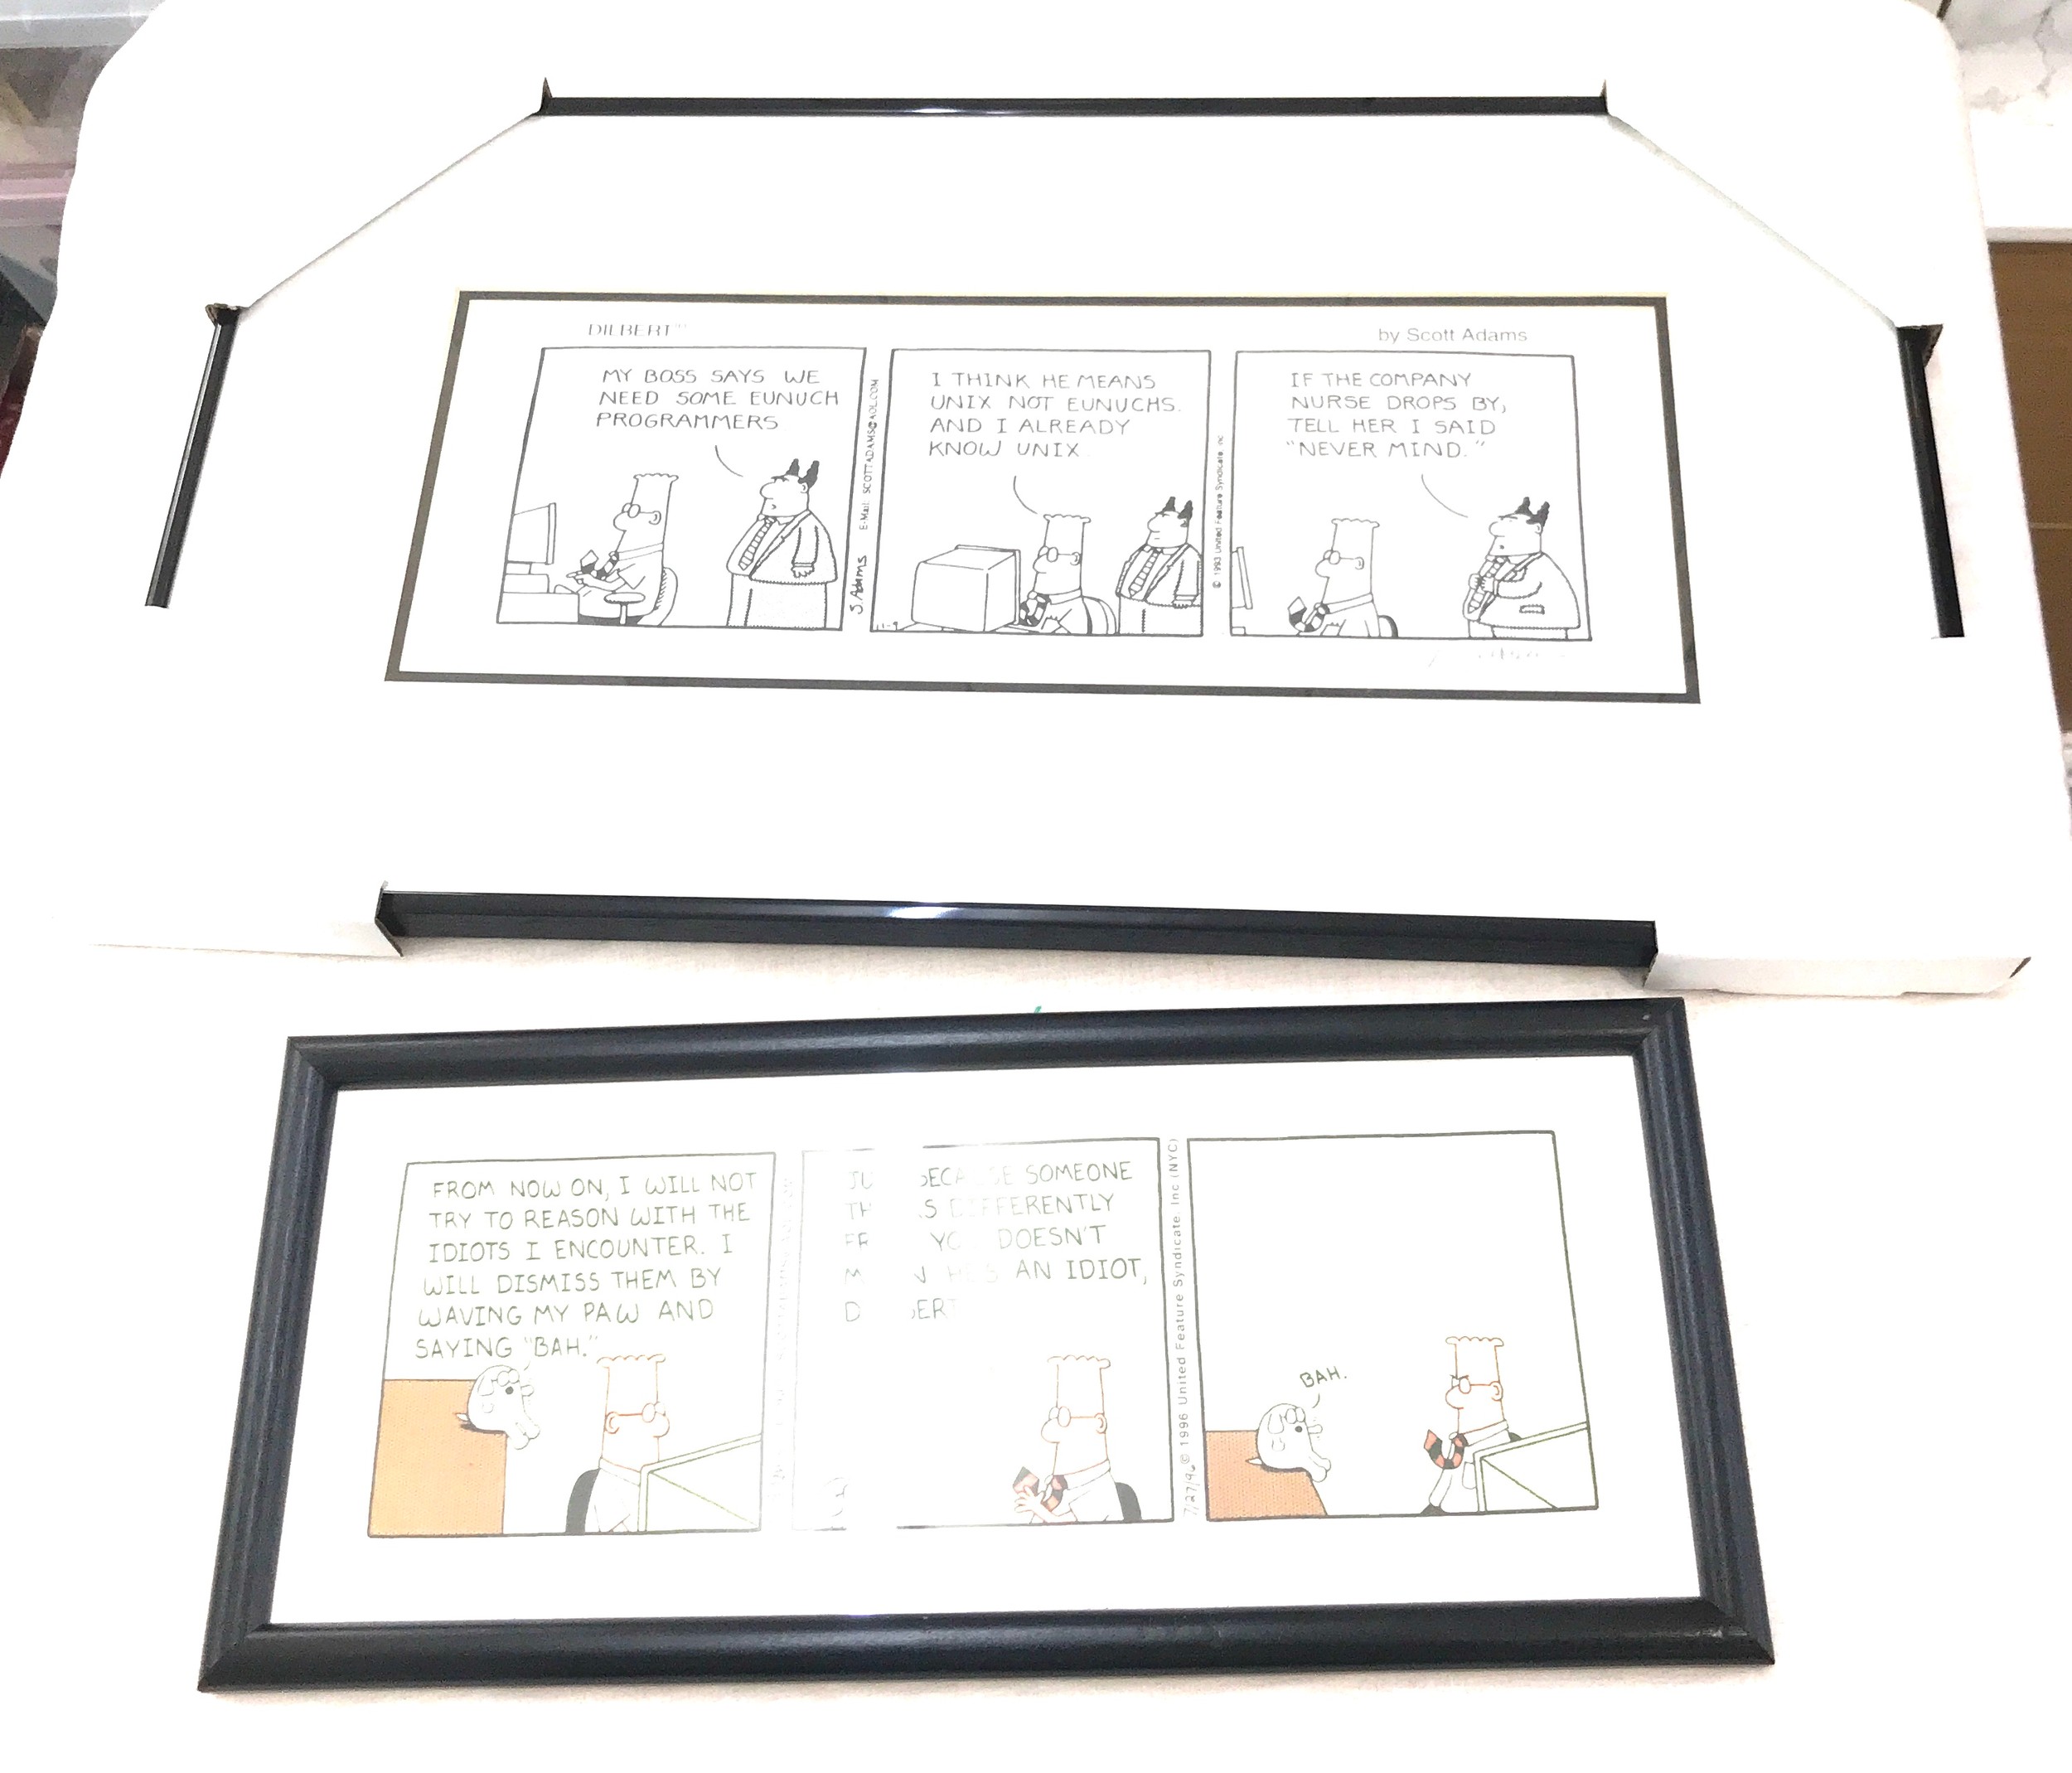 Scott Adams, 20th century, Dilbert cartoon print, limited edition no. 766/850, signed in pencil to